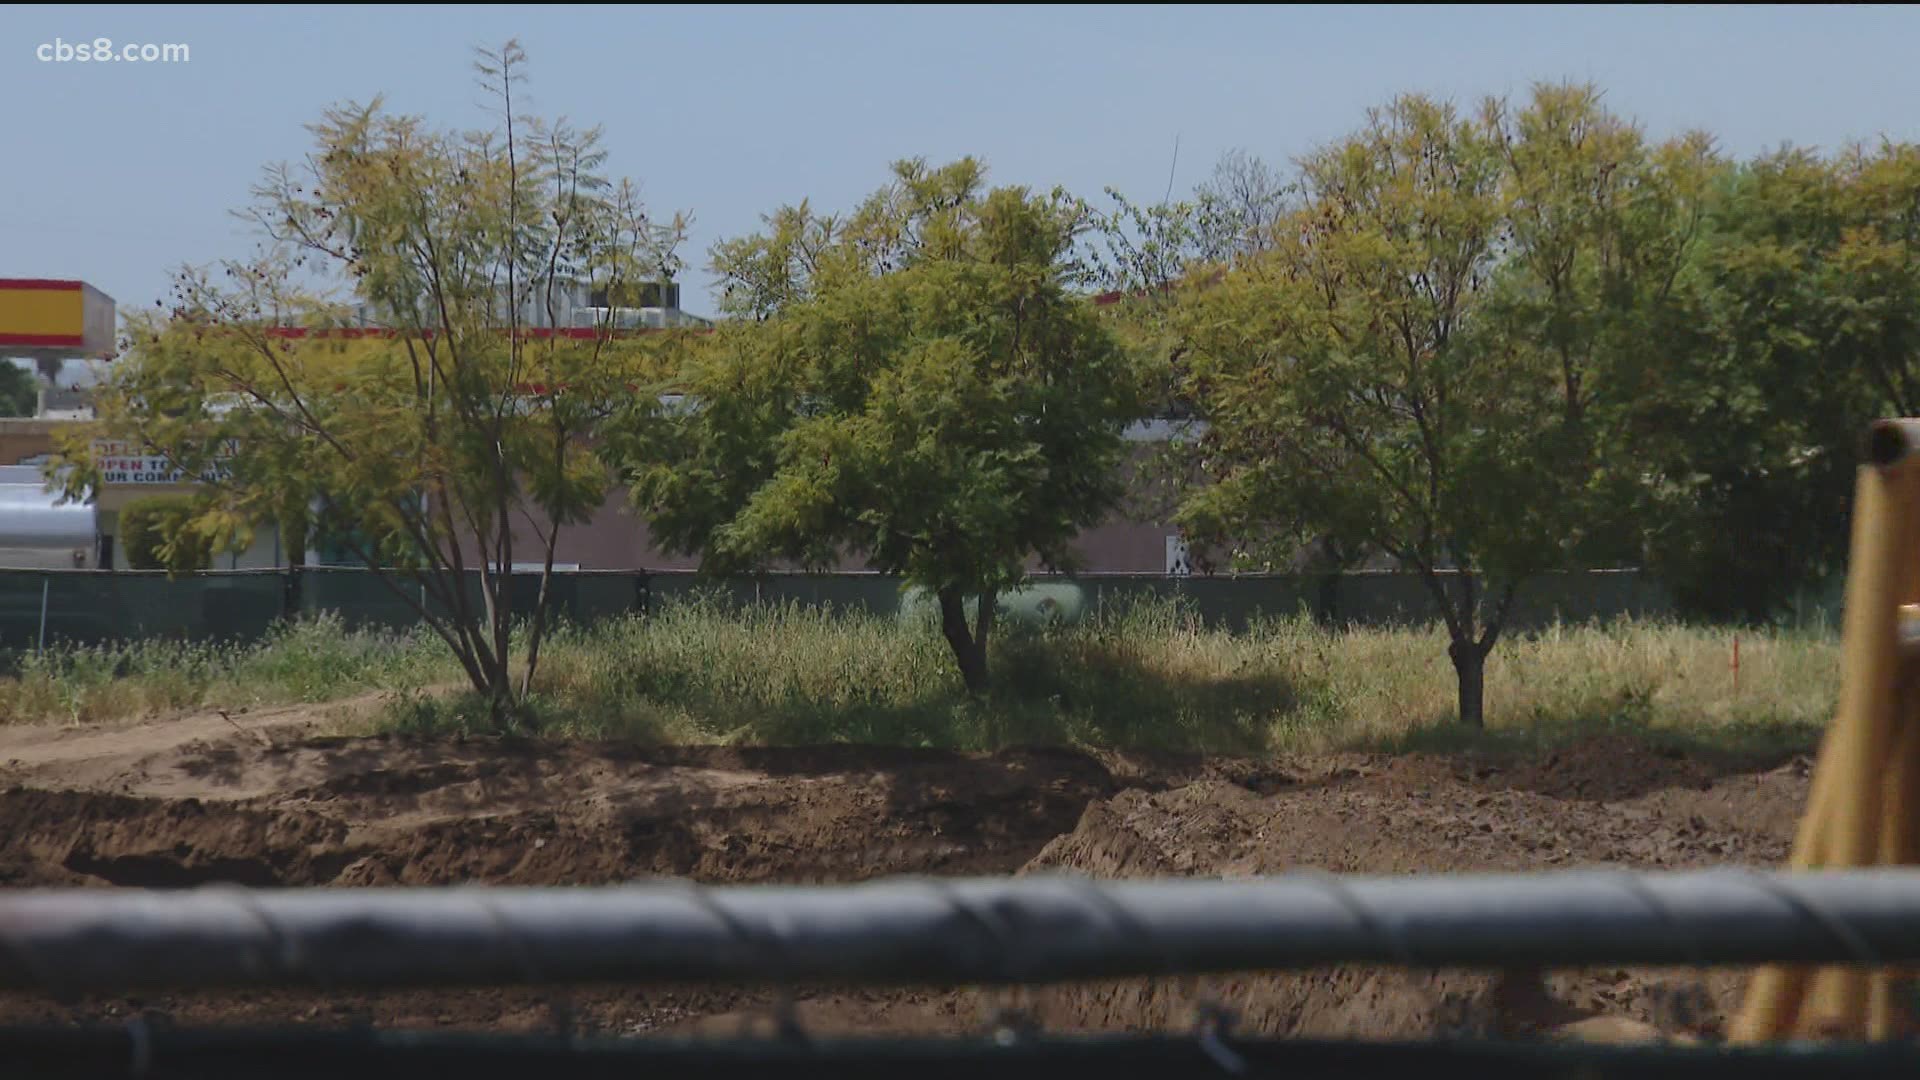 20 trees are set to be cut down to make room for a new San Diego County library.